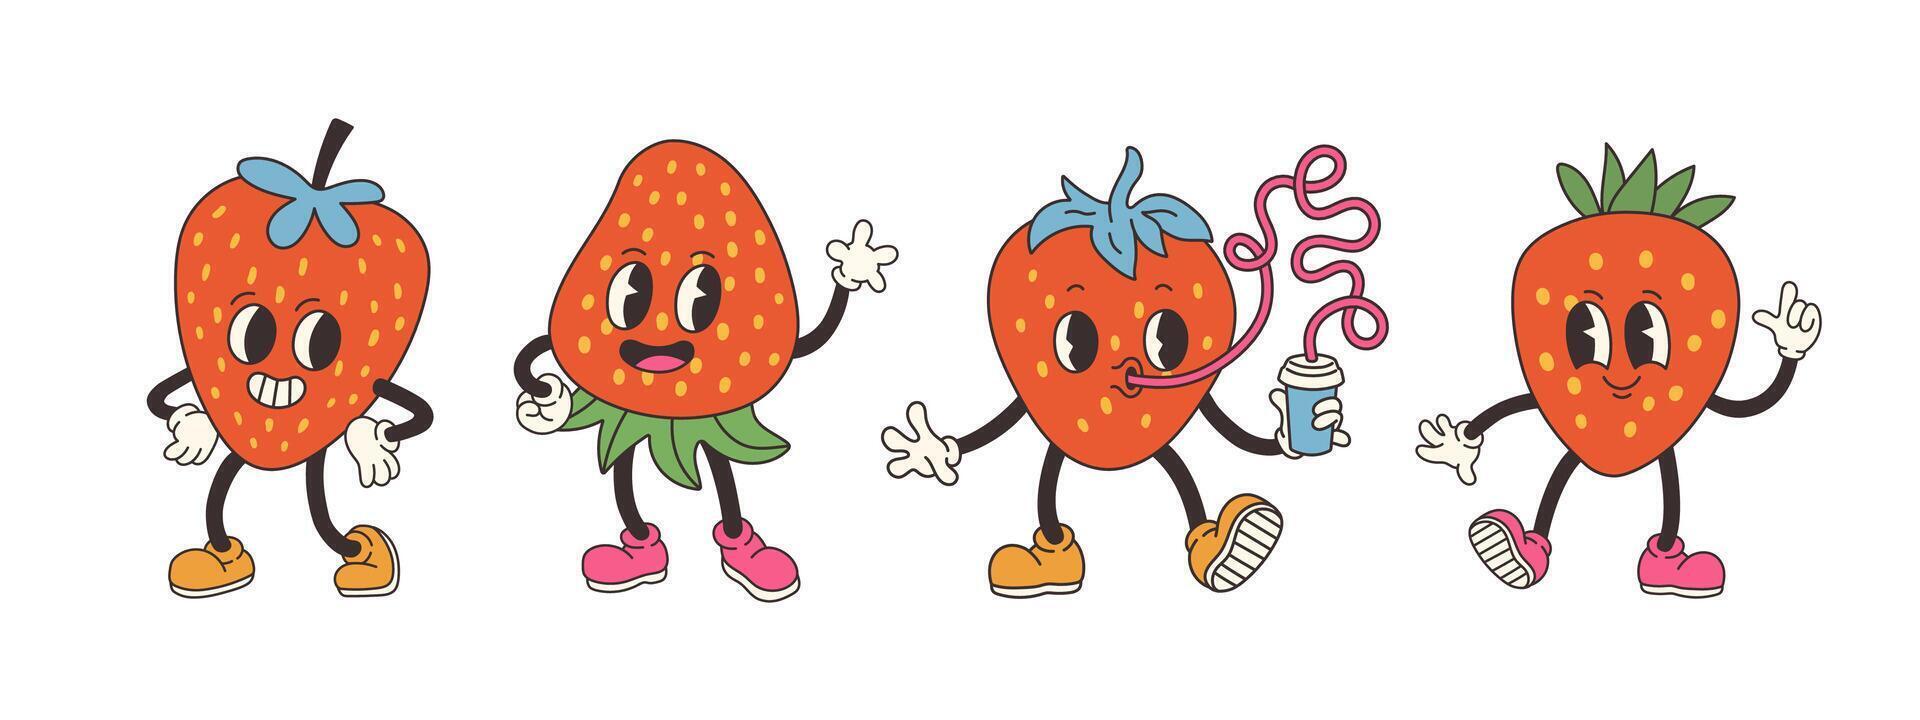 Groovy strawberry set. Hand draw Funny Retro vintage trendy style strawberry cartoon character illustration. Doodle Comic collection. Vector illustration